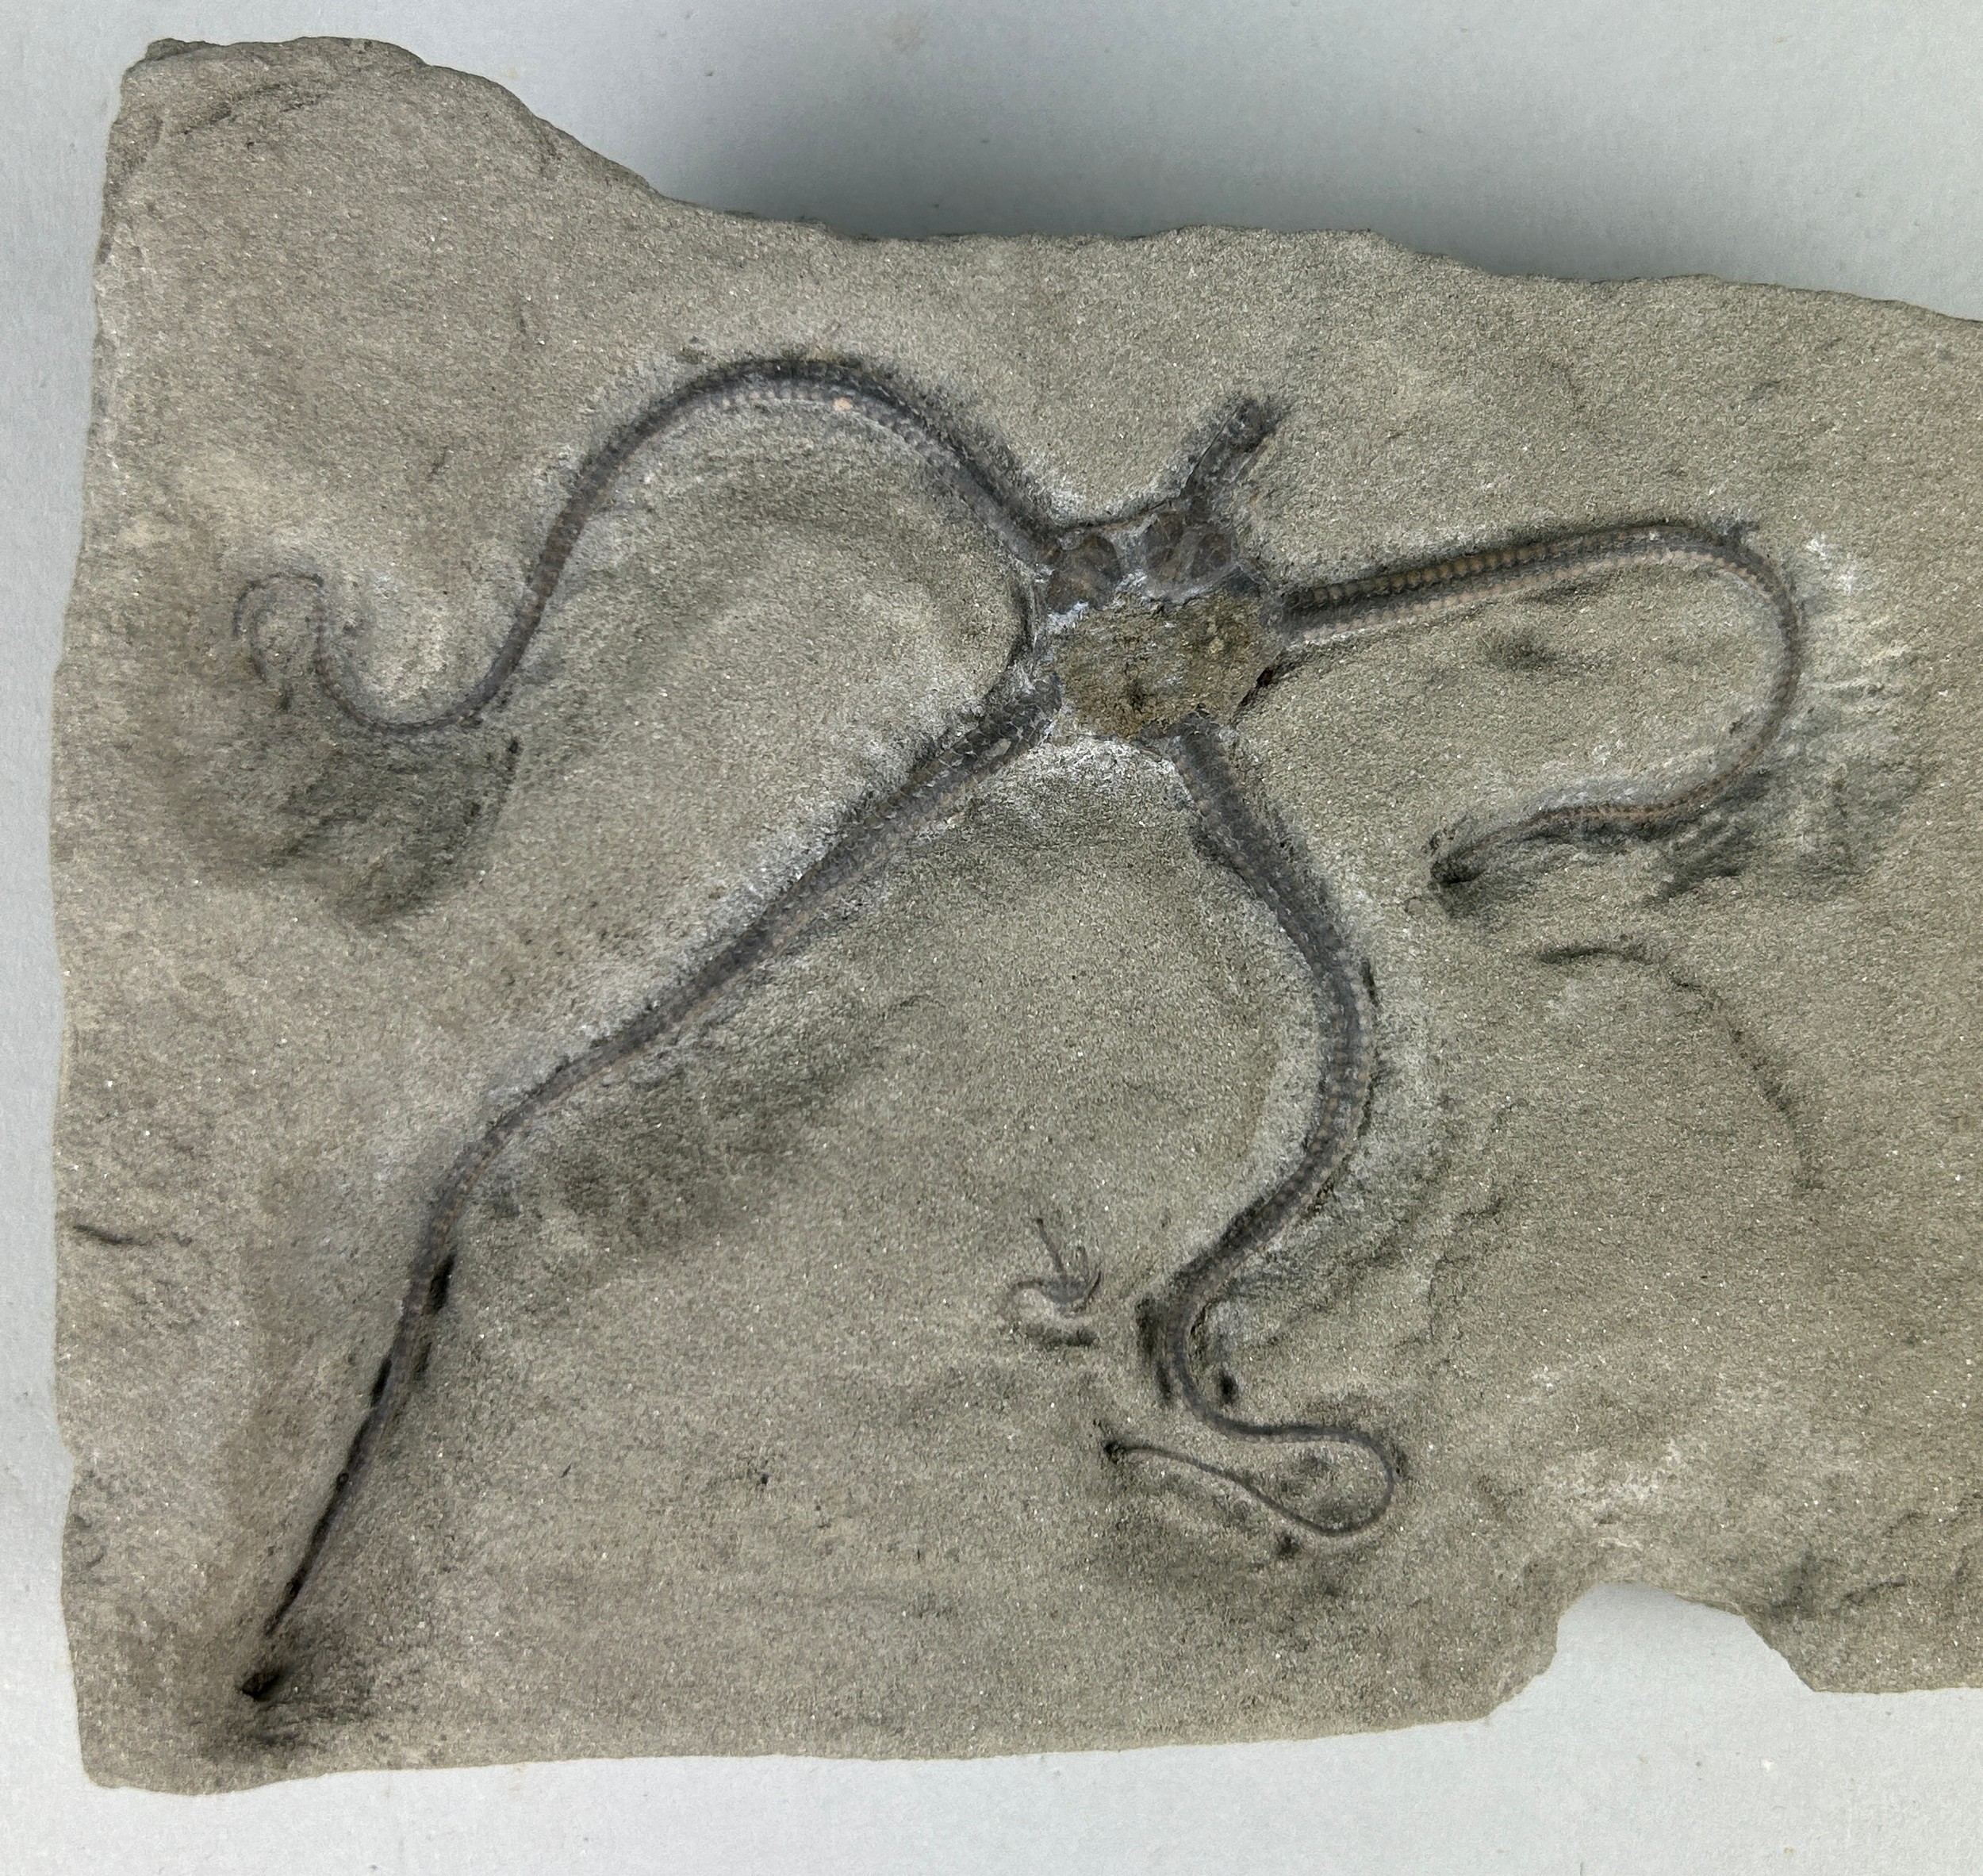 A BRITISH FOSSIL BRITTLE STARFISH Aesthetic limestone slab containing the remains of three - Image 2 of 3